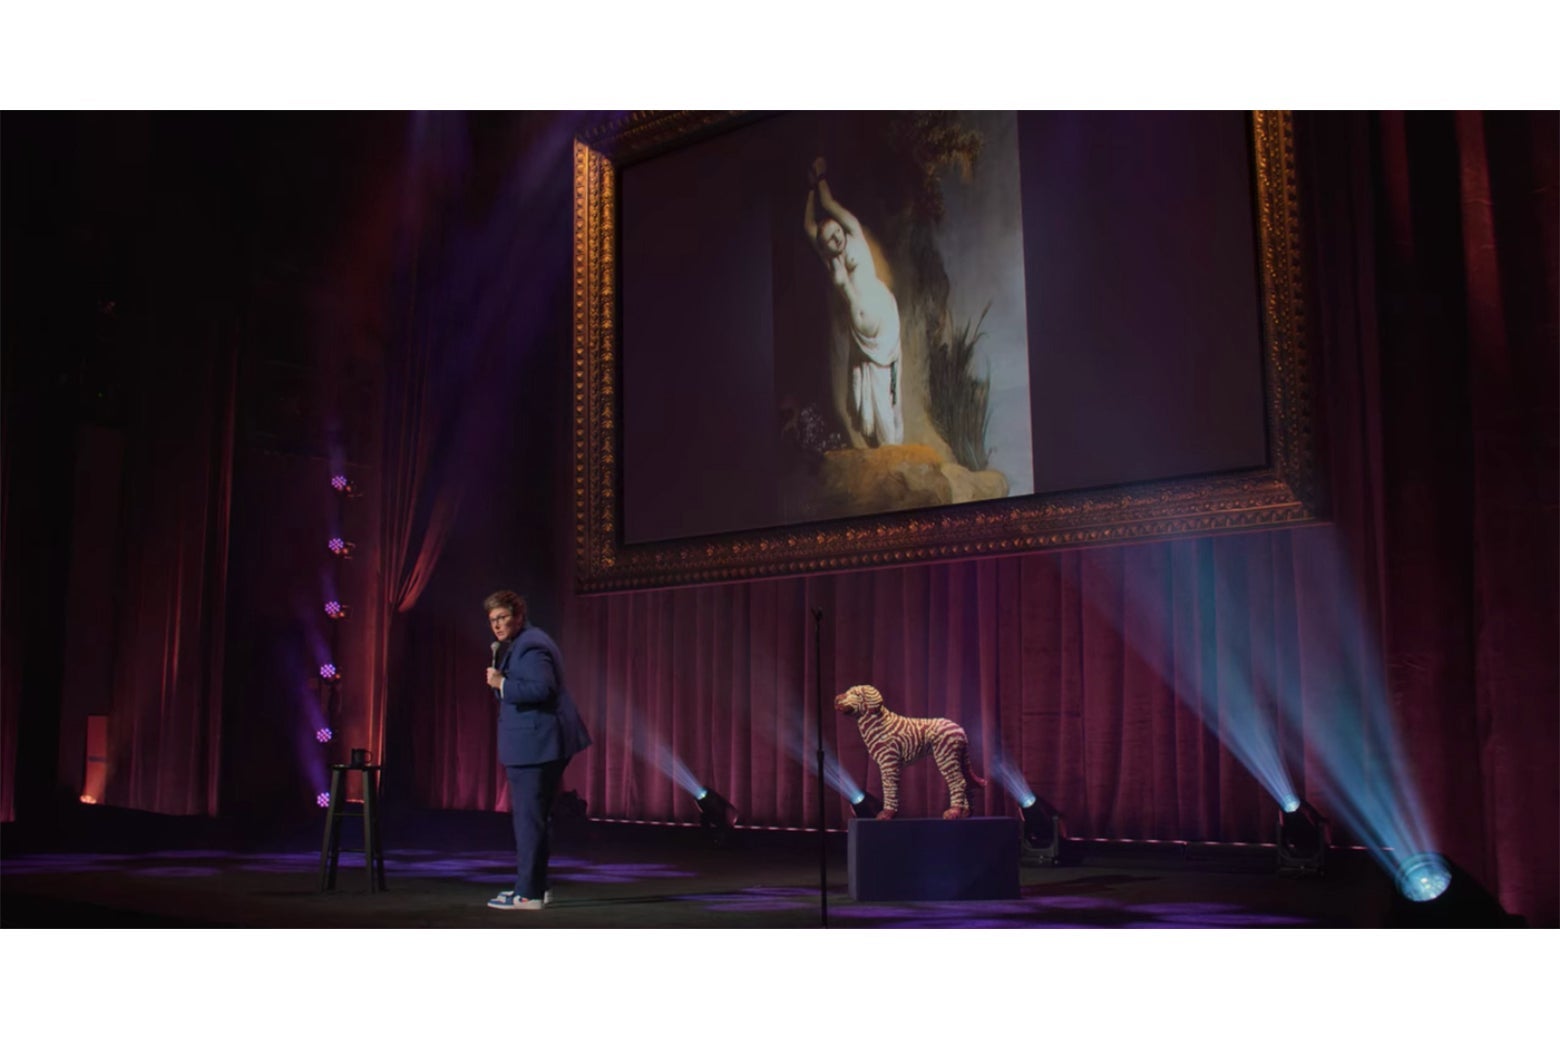 Hannah Gadsby onstage in front of a Rembrandt painting of Andromeda chained to her rock.